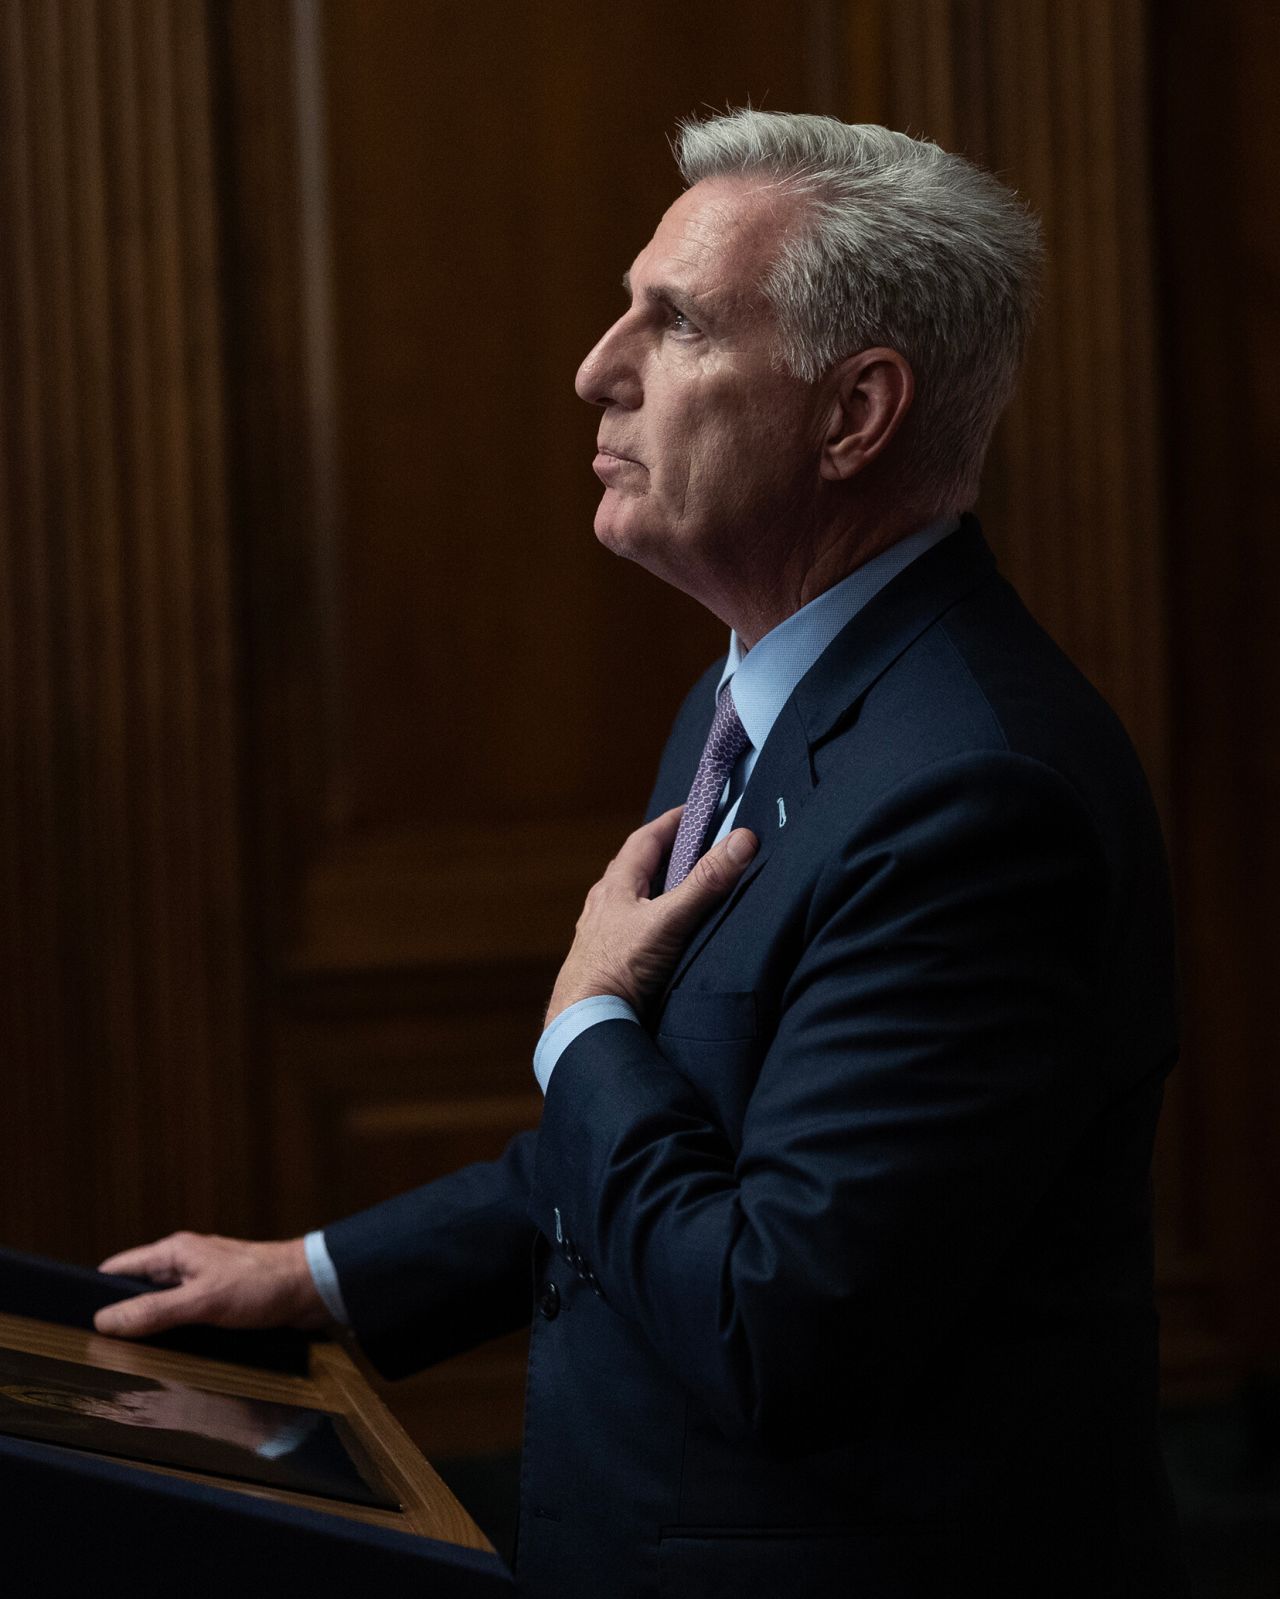 US Rep. Kevin McCarthy speaks in the US Capitol's Rayburn Room after he was ousted as House speaker on Tuesday, October 3. "I don't regret standing up for choosing governing over grievance. It is my responsibility. It is my job," <a href="https://www.cnn.com/2023/10/03/politics/mccarthy-gaetz-vote-motion-to-vacate/index.html" target="_blank">McCarthy said at a wide-ranging news conference Tuesday evening</a>. "I do not regret negotiating. Our government is designed to find compromise."